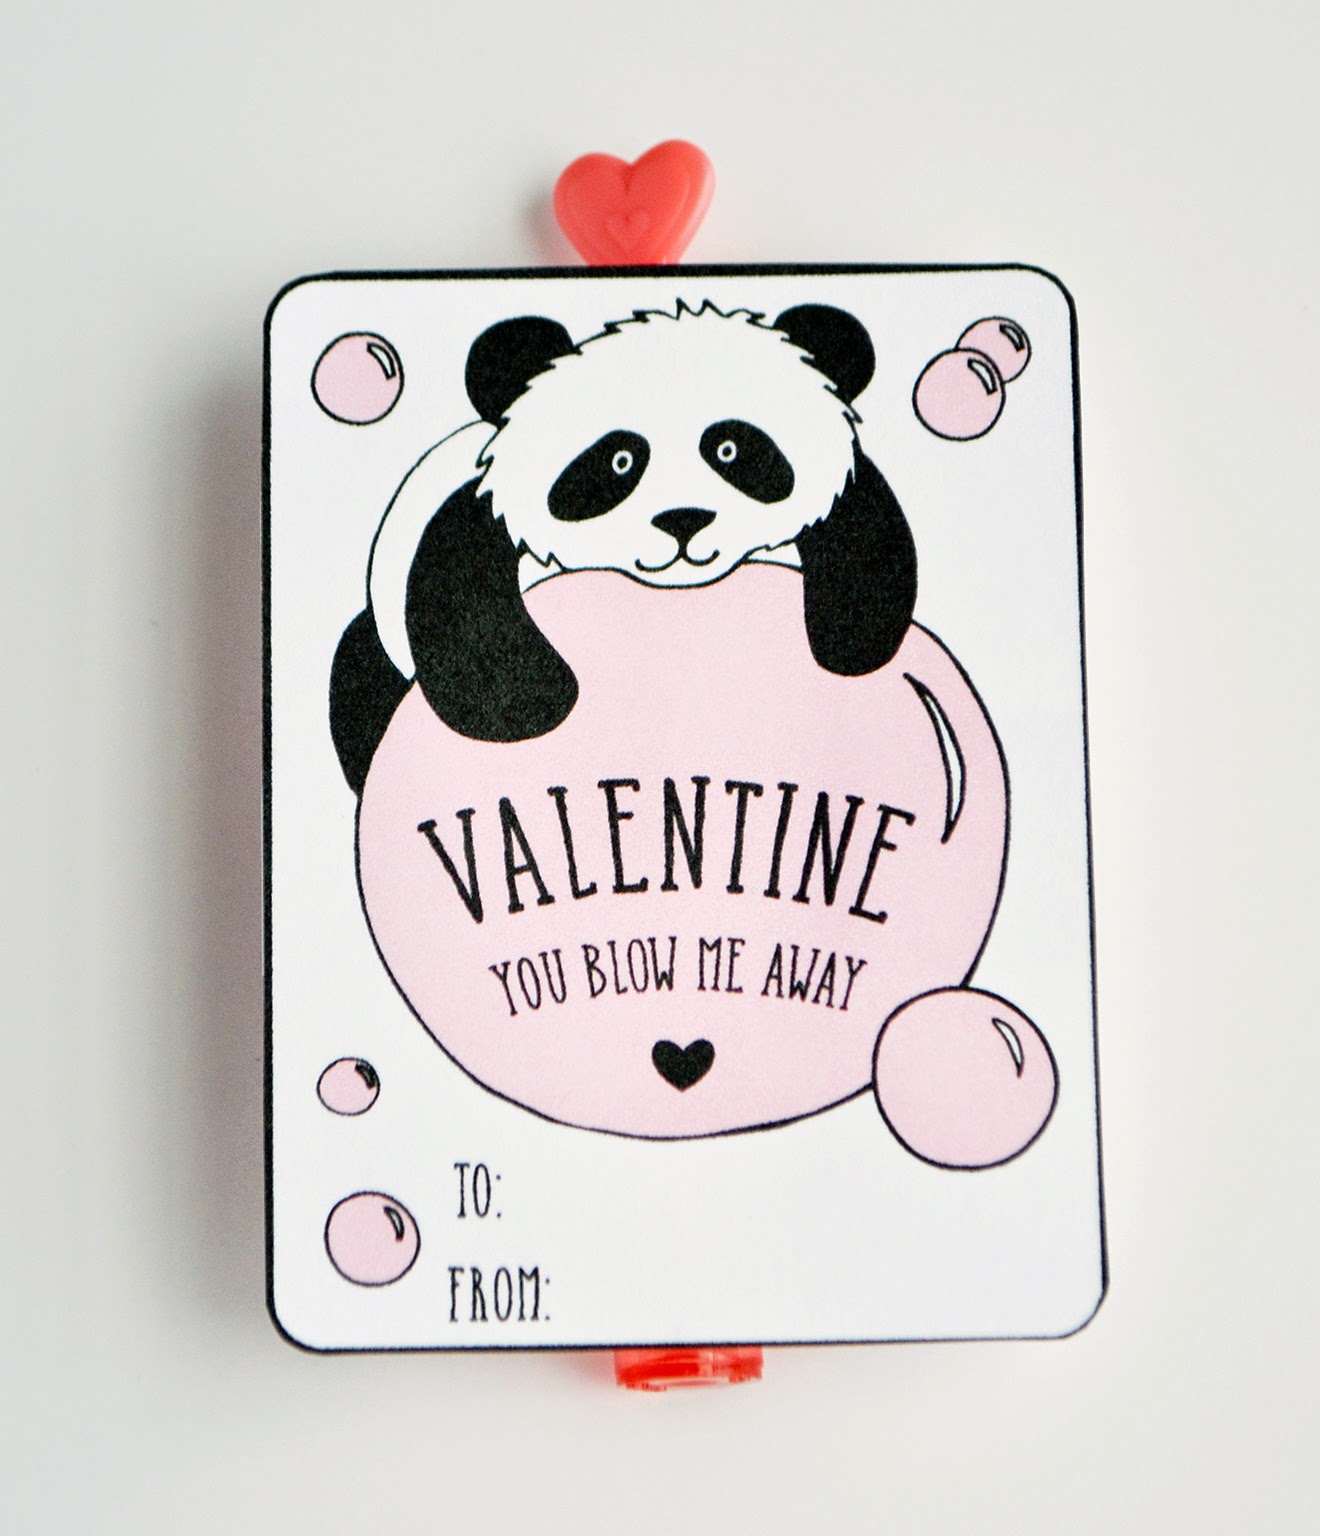 sunny-by-design-panda-bubbles-free-printable-valentine-card